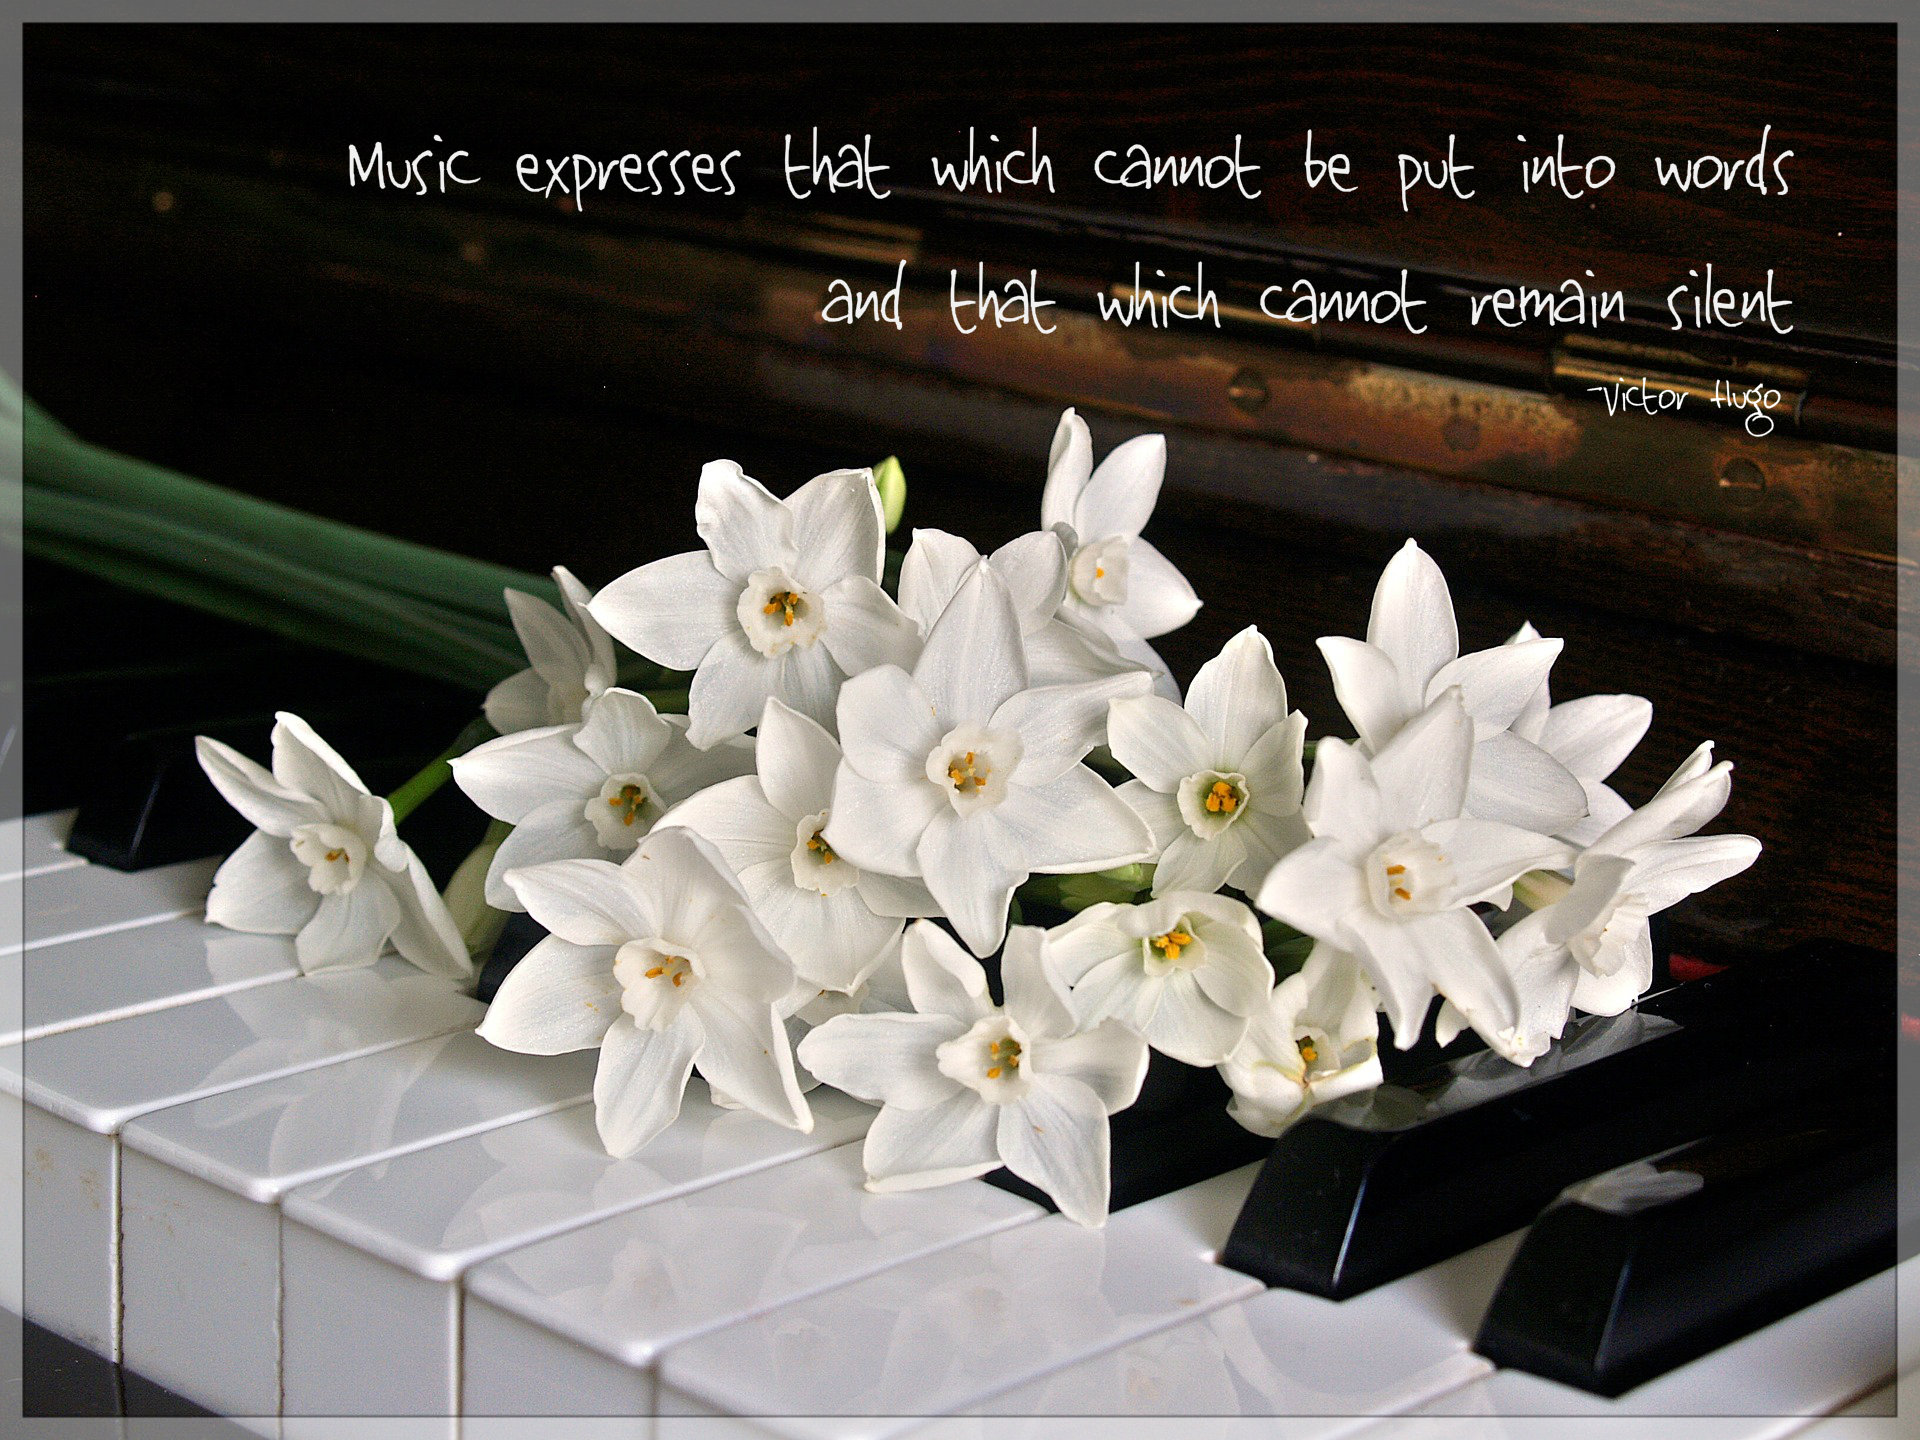 Music expresses that which cannot be put into words and that which cannot remain silent Quote by Victor Hugo